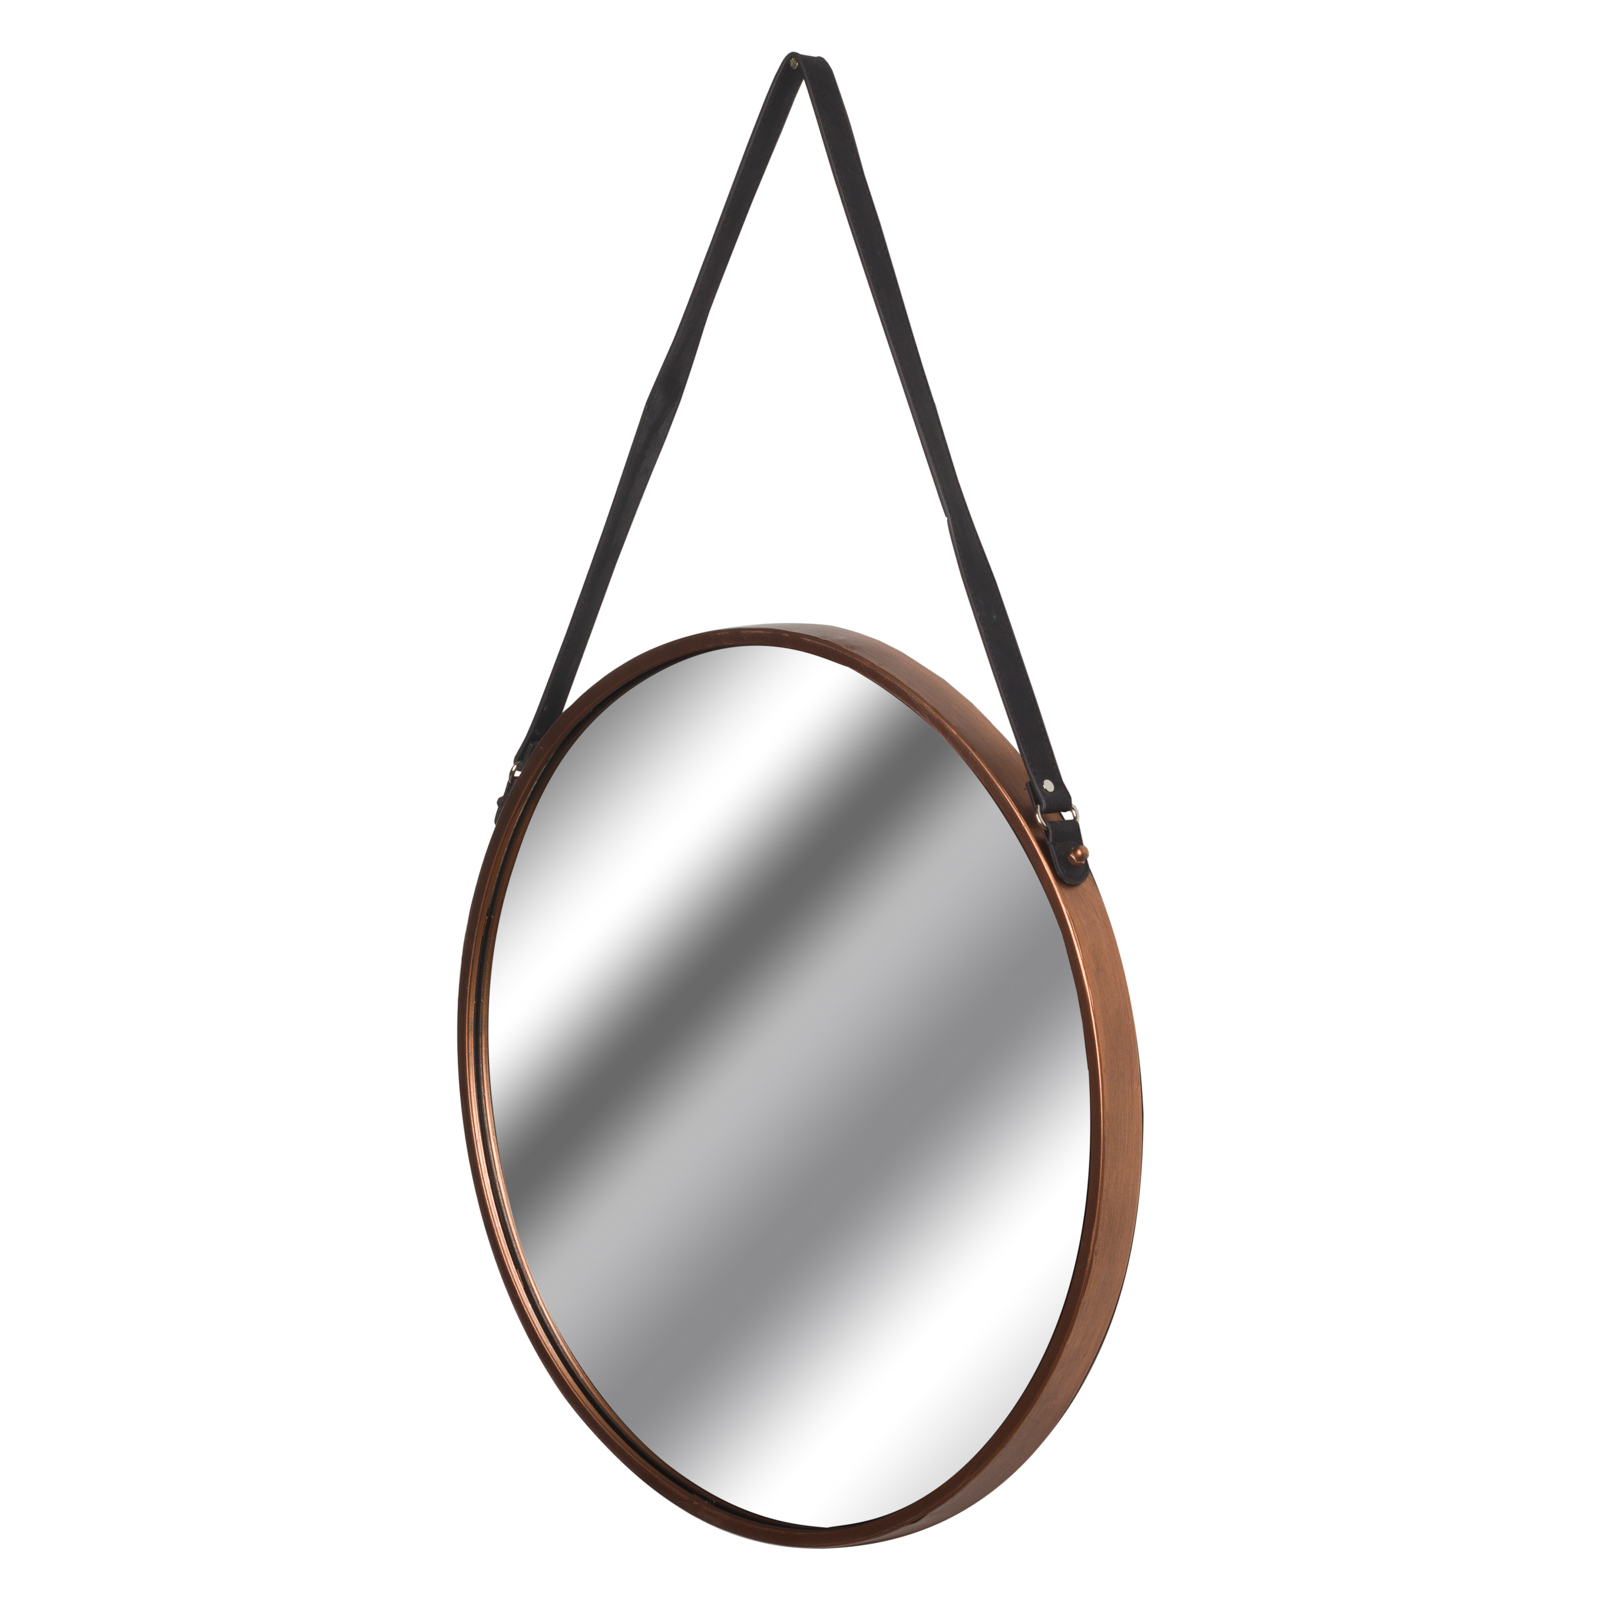 Copper Rimmed Round Hanging Wall Mirror With Black Strap - Image 1